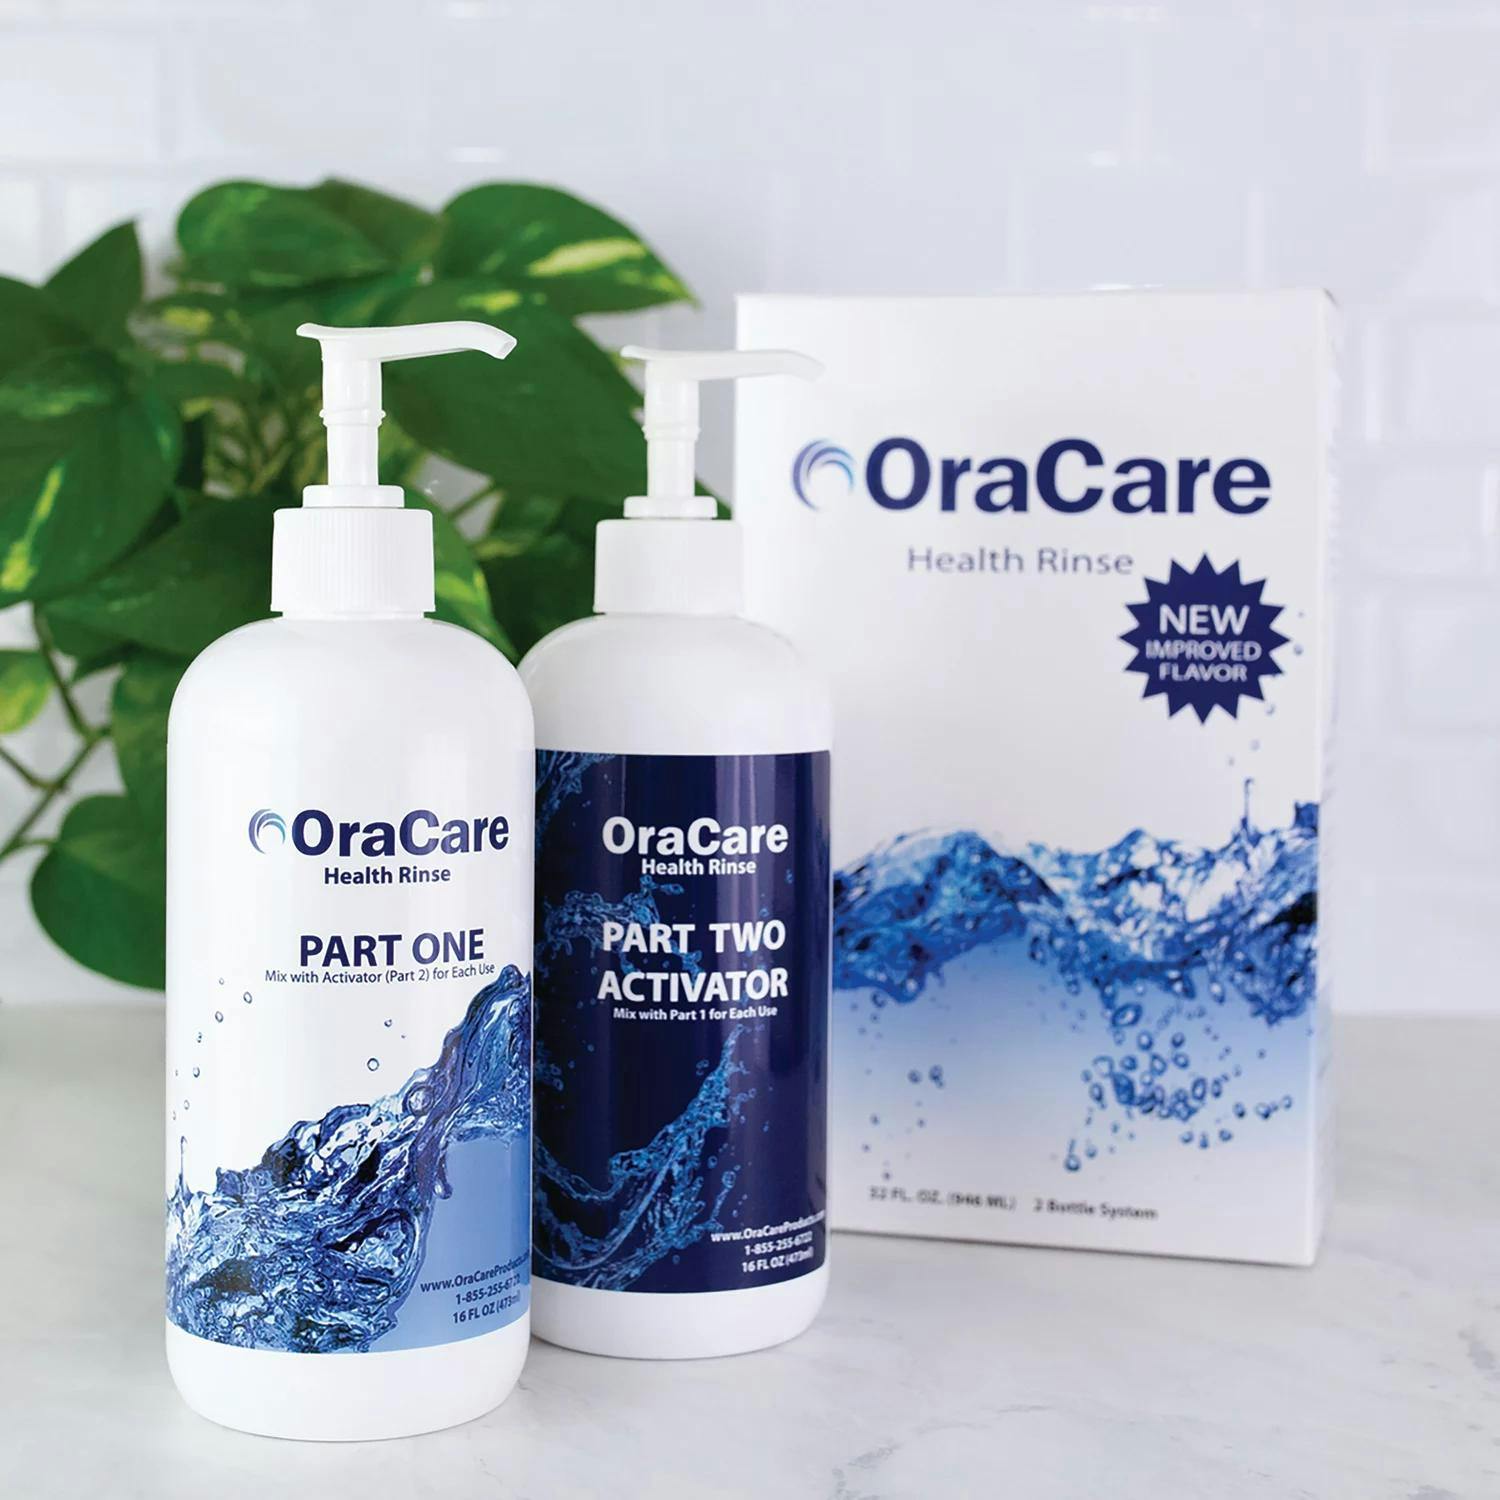 A Mouth Rinse to Tackle More Than Just a Single Job. Image credit: © OraCare